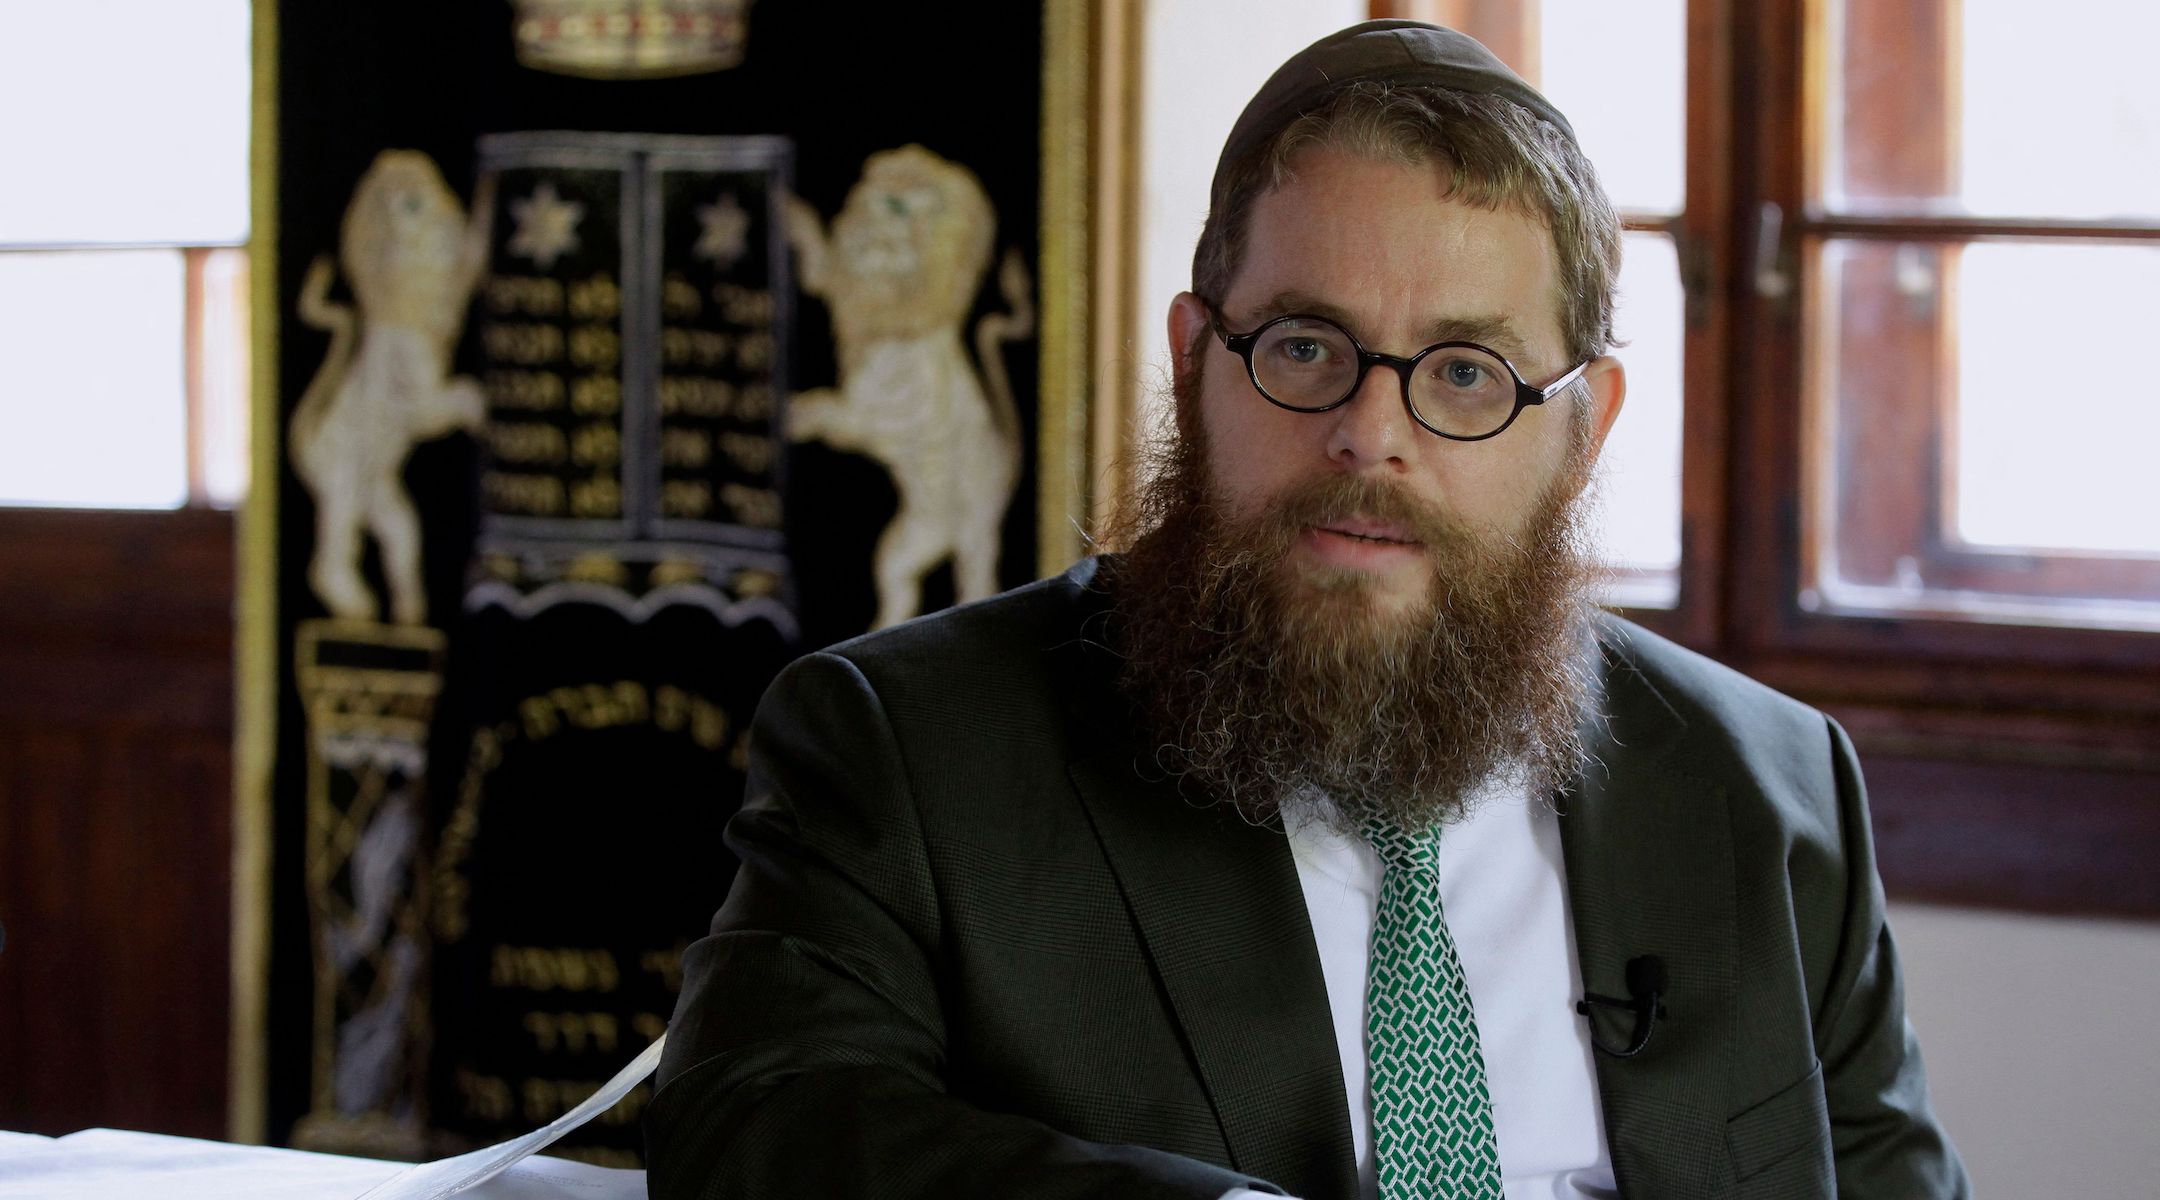 Rabbi Slomo Koves, head of the EMIH (Association of Hungarian Jewish Communities), a group affiliated with the Orthodox Hasidic Chabad-Lubavitch movement, speaks during an AFP interview in Balatonoszod, July 29, 2022. (Peter KohalmI/AFP via Getty Images)